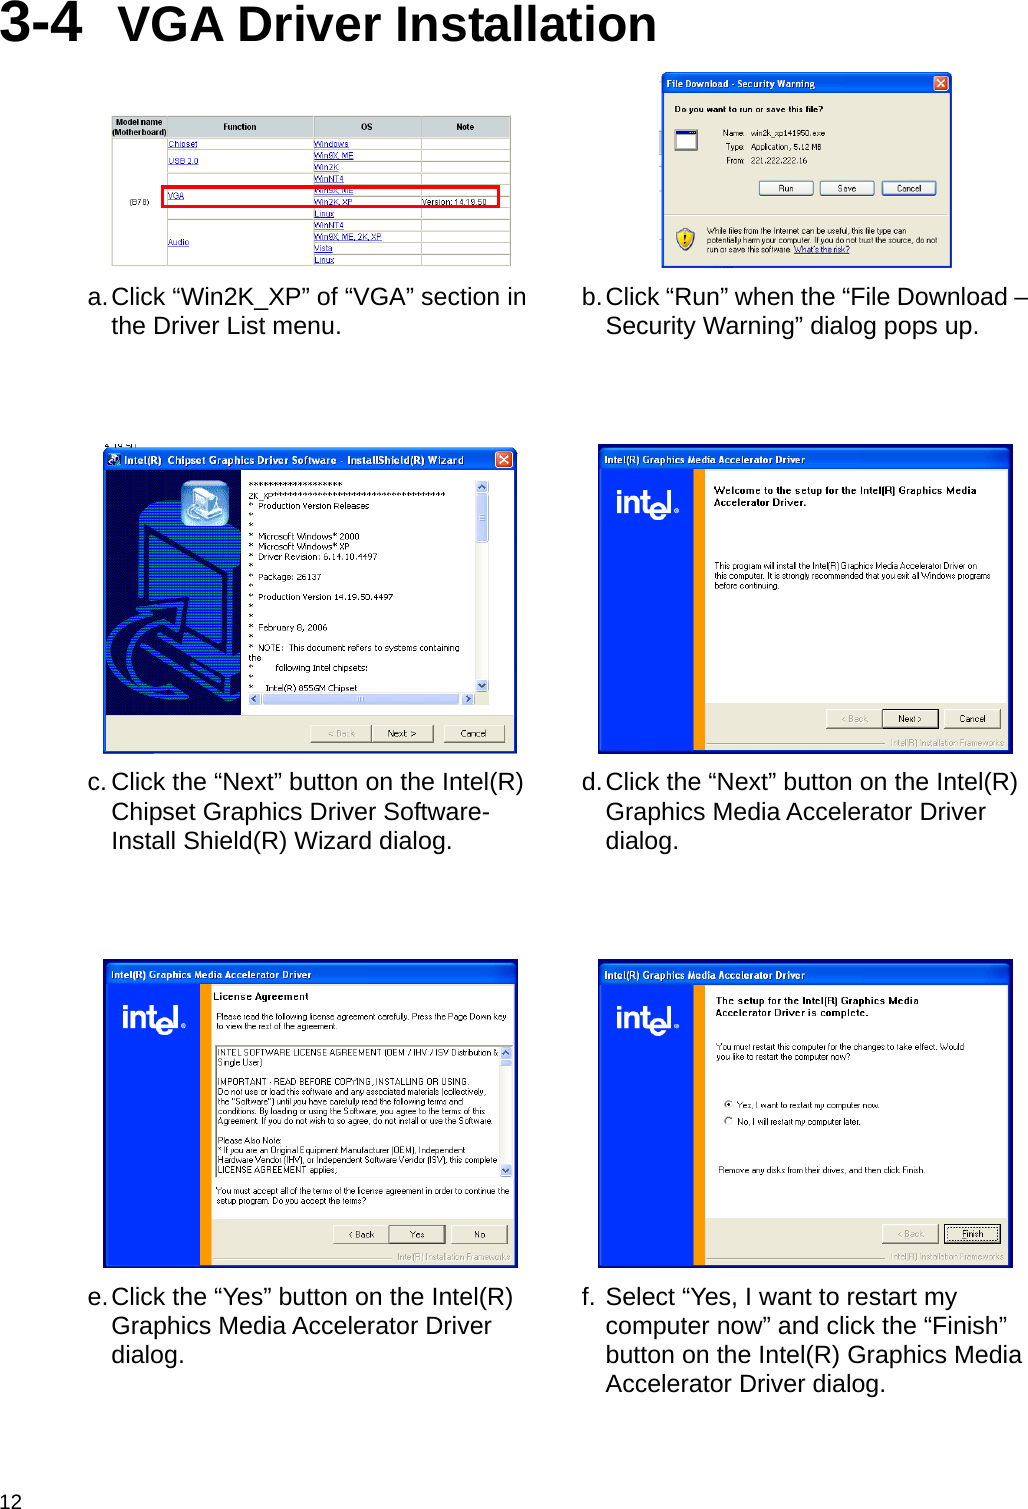  12 3-4  VGA Driver Installation    a. Click “Win2K_XP” of “VGA” section in the Driver List menu.  b. Click “Run” when the “File Download – Security Warning” dialog pops up.      c. Click the “Next” button on the Intel(R) Chipset Graphics Driver Software- Install Shield(R) Wizard dialog. d. Click the “Next” button on the Intel(R) Graphics Media Accelerator Driver dialog.      e. Click the “Yes” button on the Intel(R) Graphics Media Accelerator Driver dialog. f. Select “Yes, I want to restart my computer now” and click the “Finish” button on the Intel(R) Graphics Media Accelerator Driver dialog. 